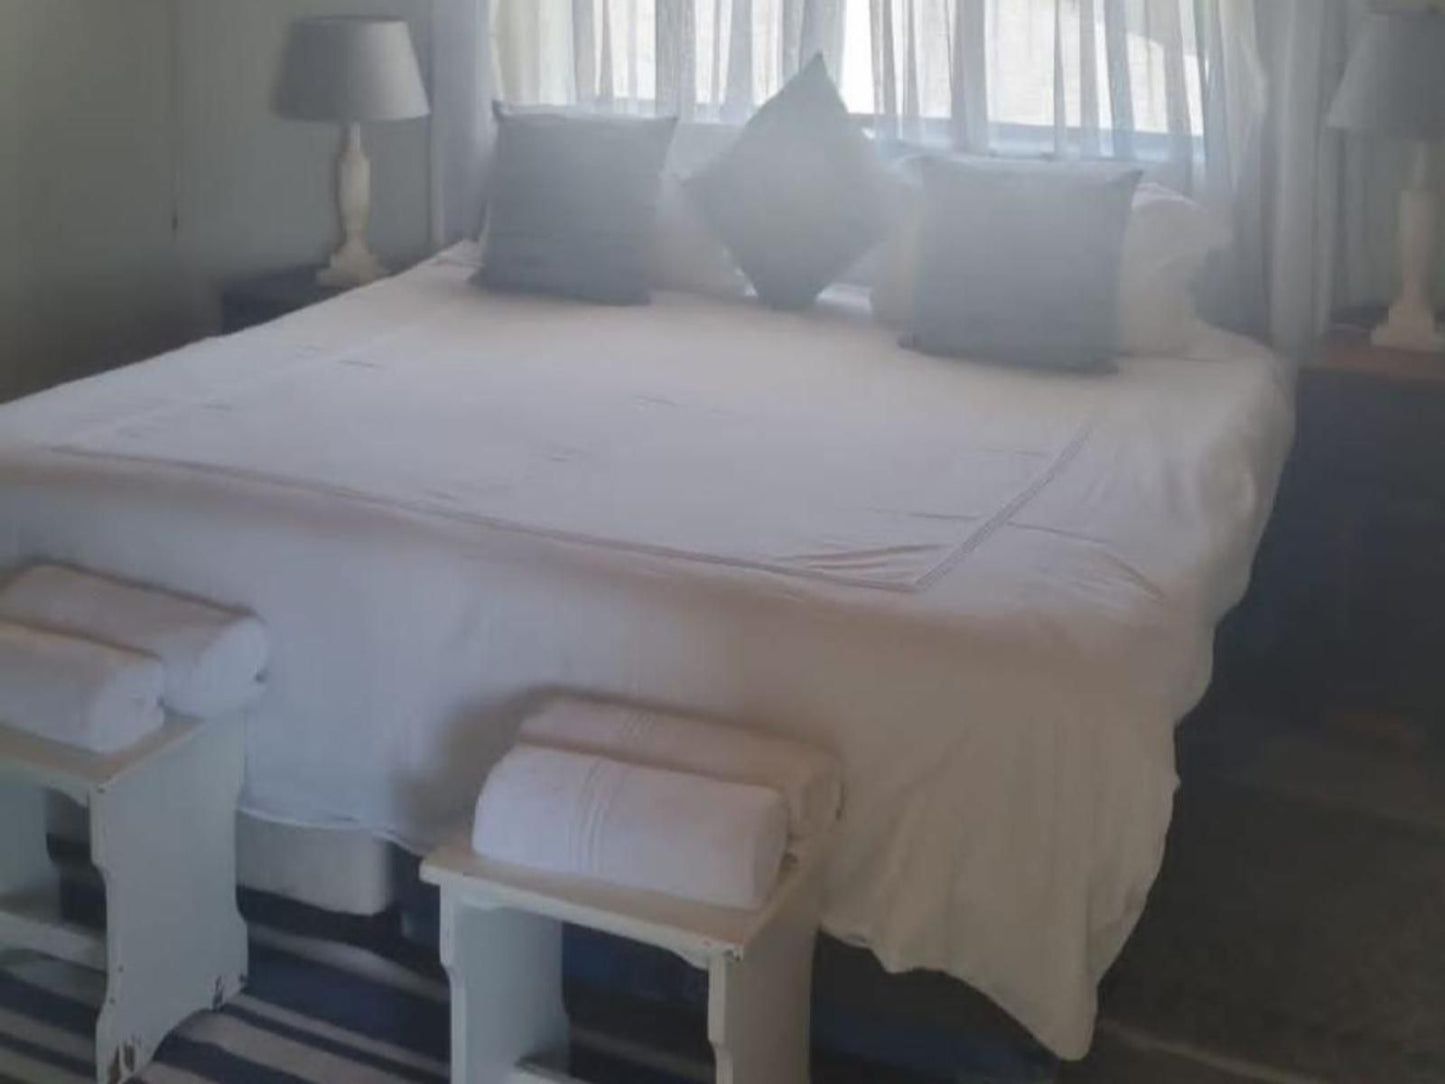 Gecko Suites Bluewater Bay Port Elizabeth Eastern Cape South Africa Unsaturated, Bedroom